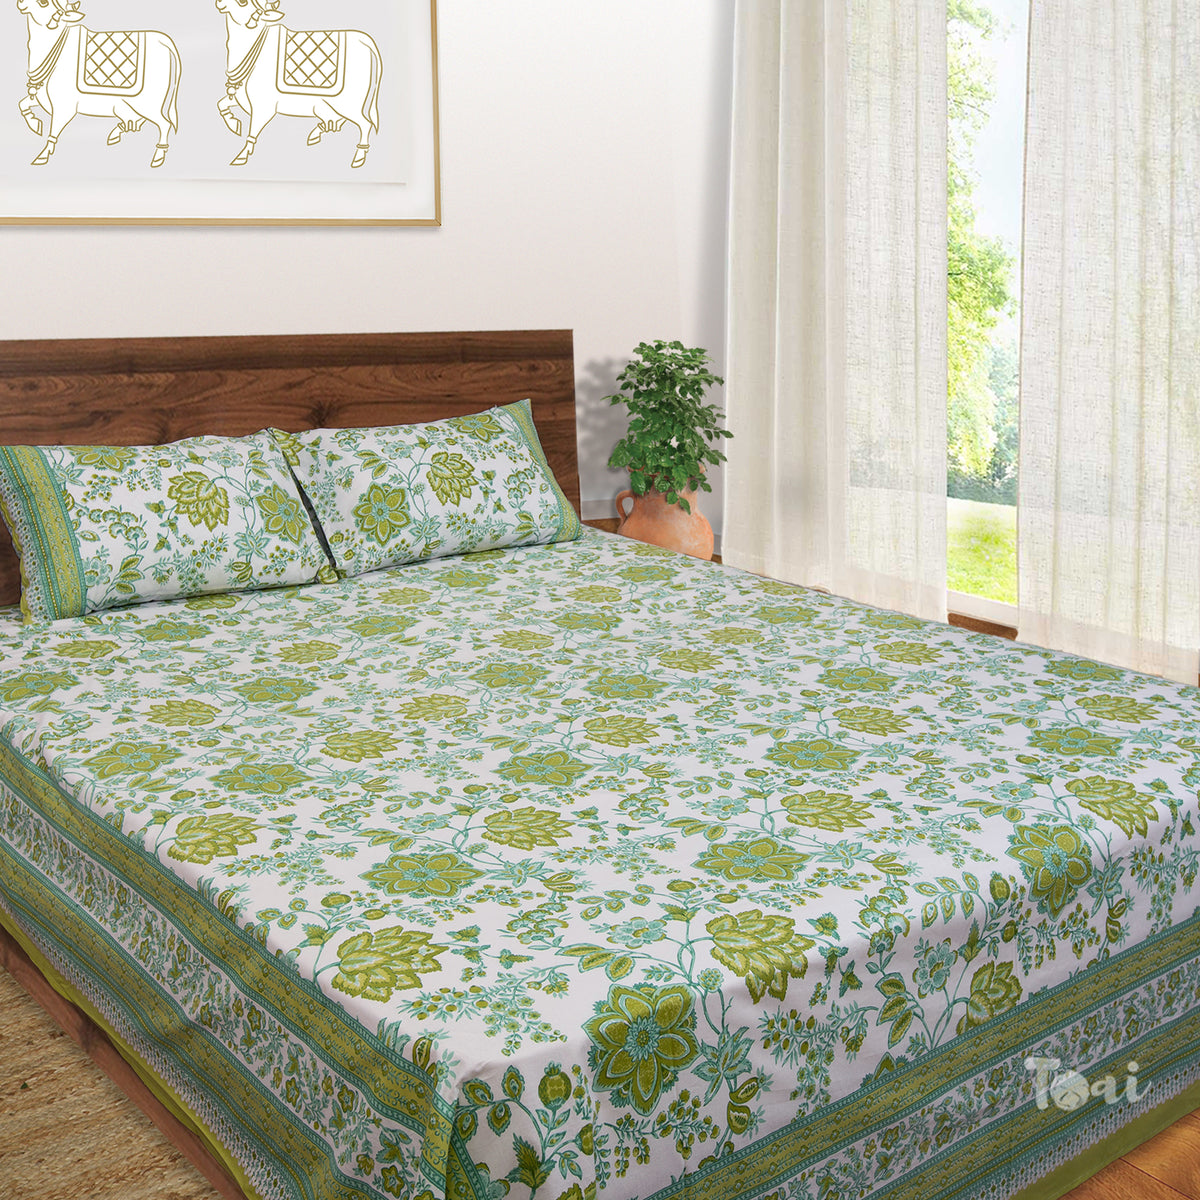 Green Garden On White  |hand screen printed bedsheet| Double bed ,Queen size | 250 TC Pure Cotton| Complementing pillow covers